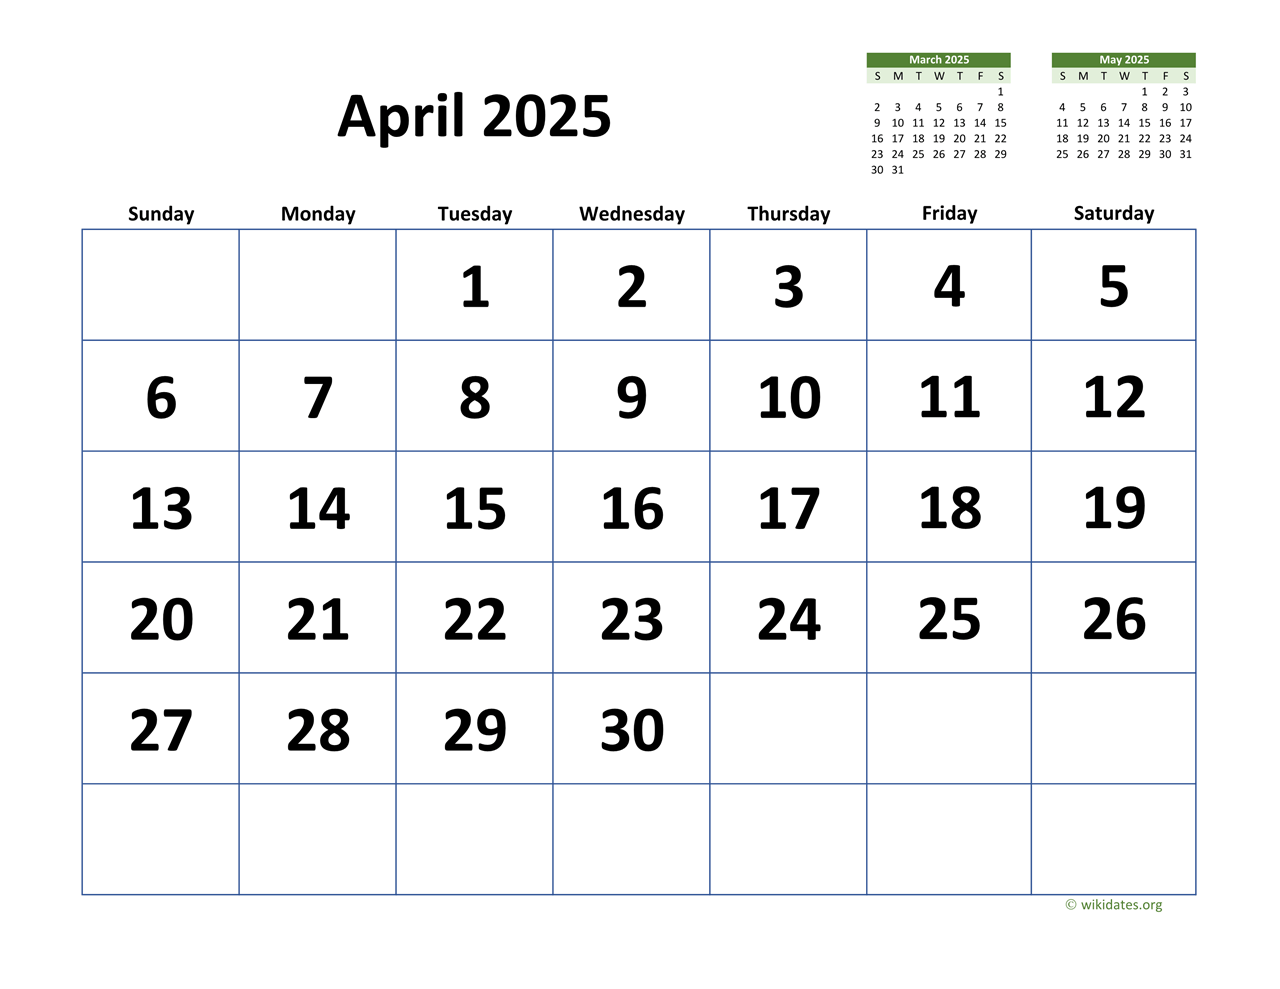 april-2025-calendar-with-weekend-shaded-wikidates